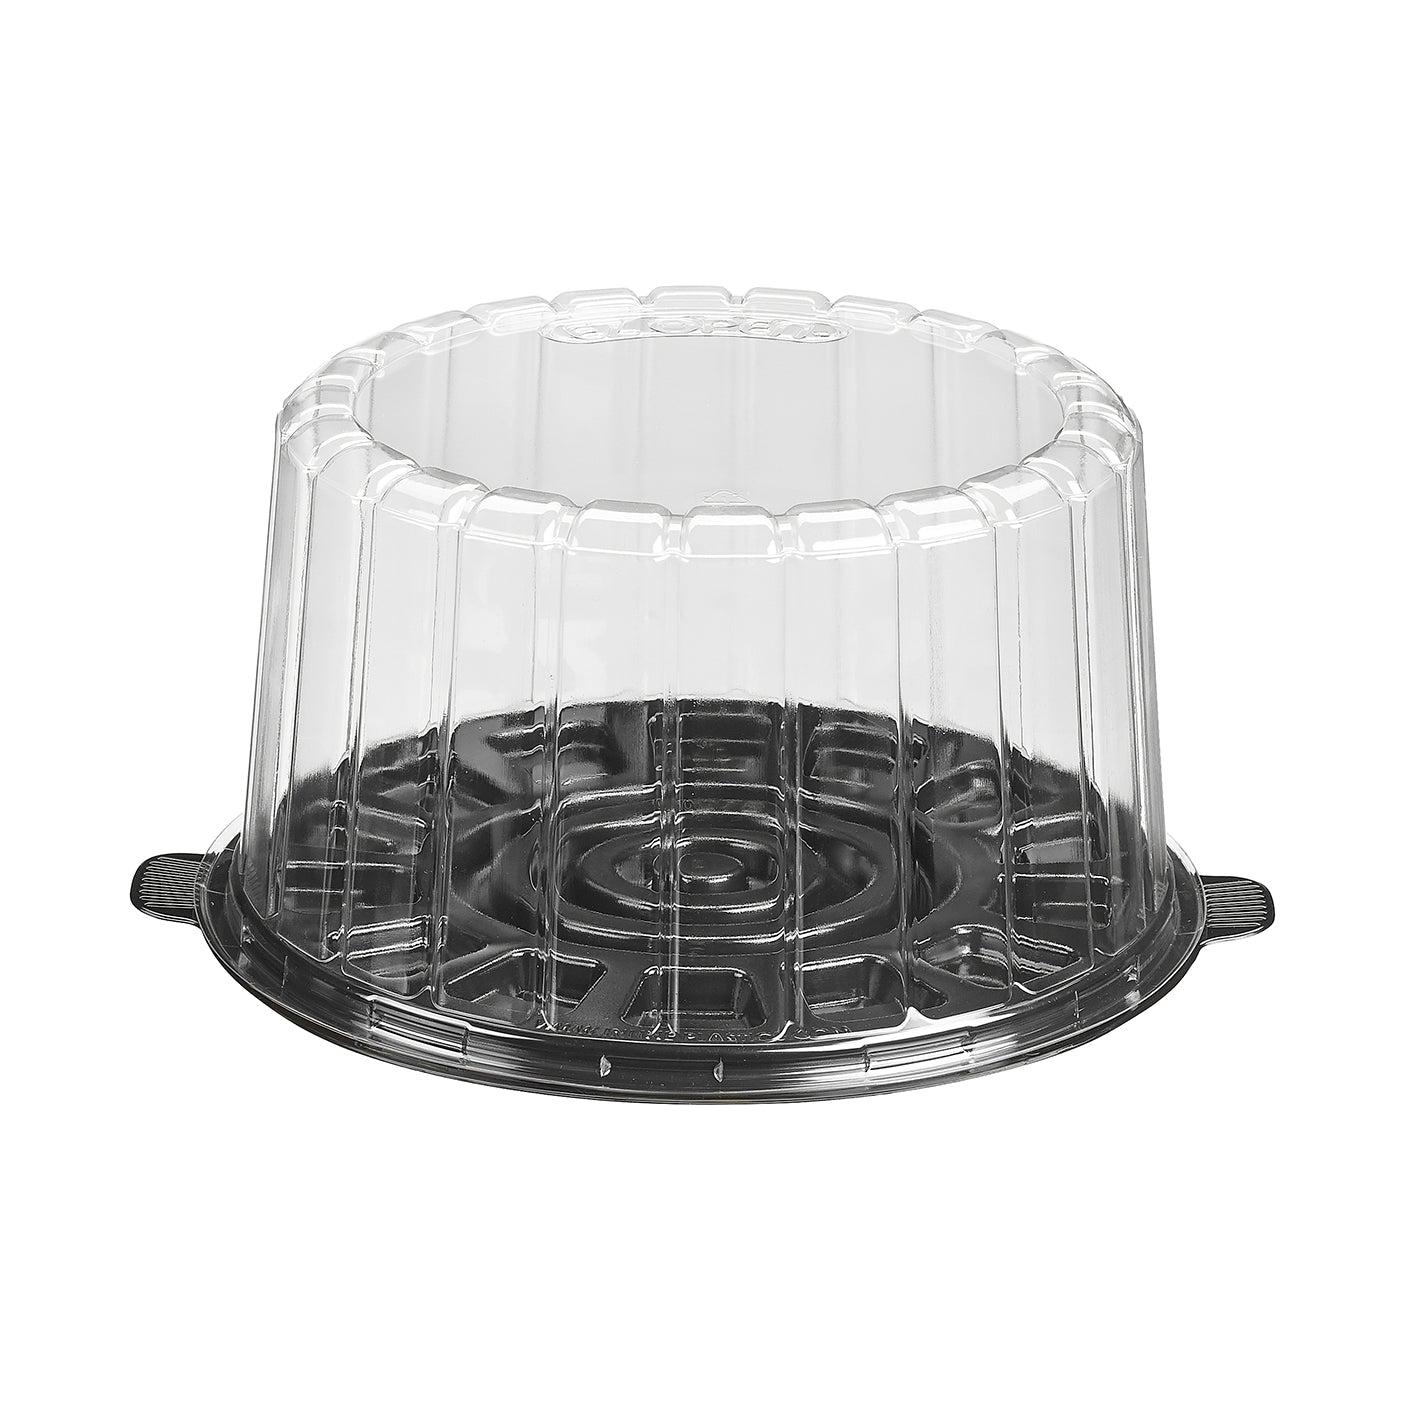 1-Count Jumbo Cupcake Container Swirl Dome (270 CASES)